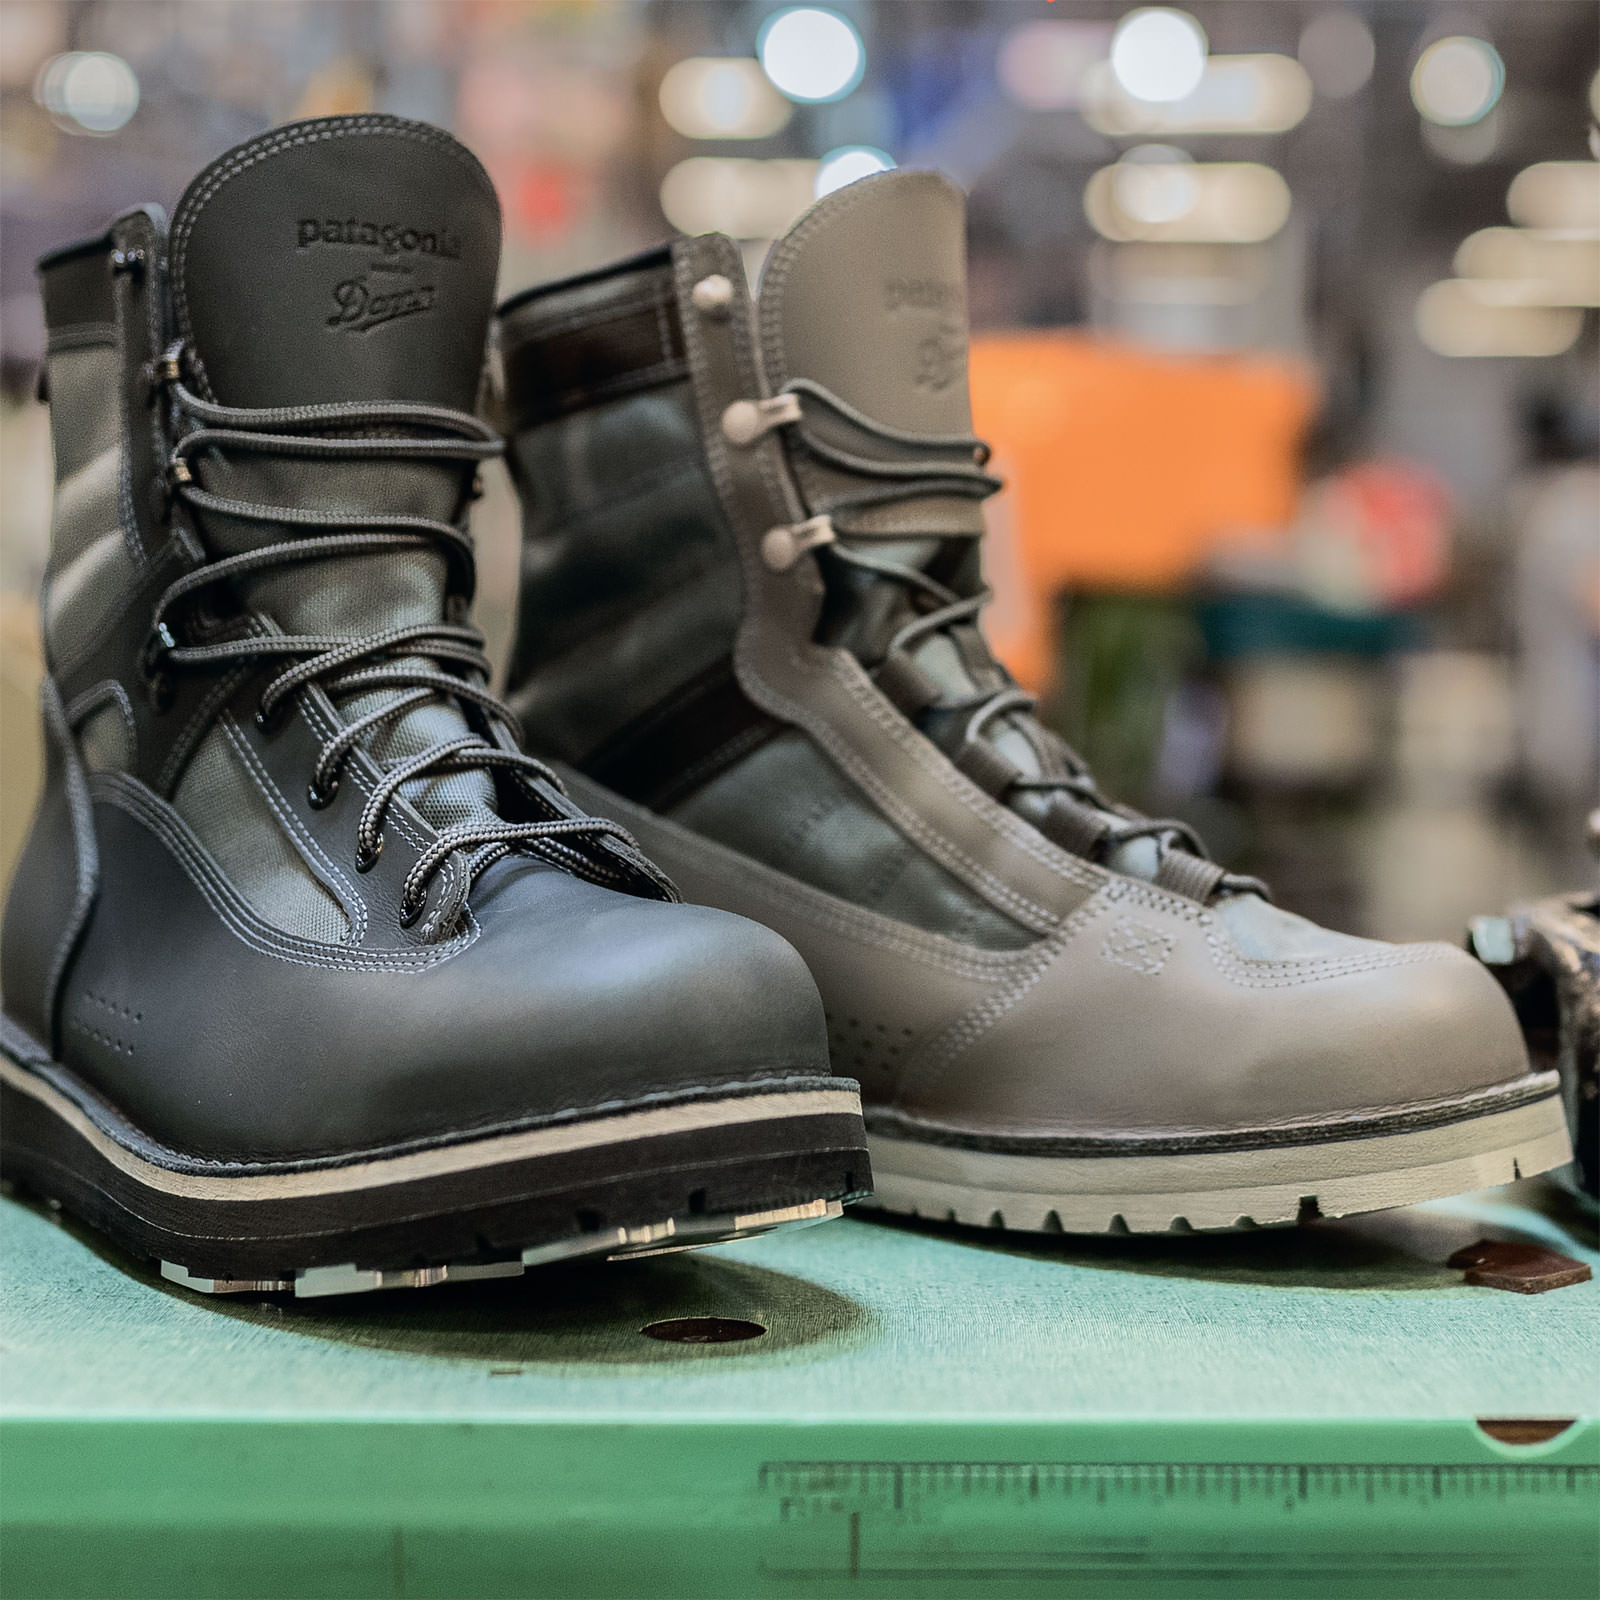 Patagonia Foot Tractor Wading Boots Wear Review, 58% OFF